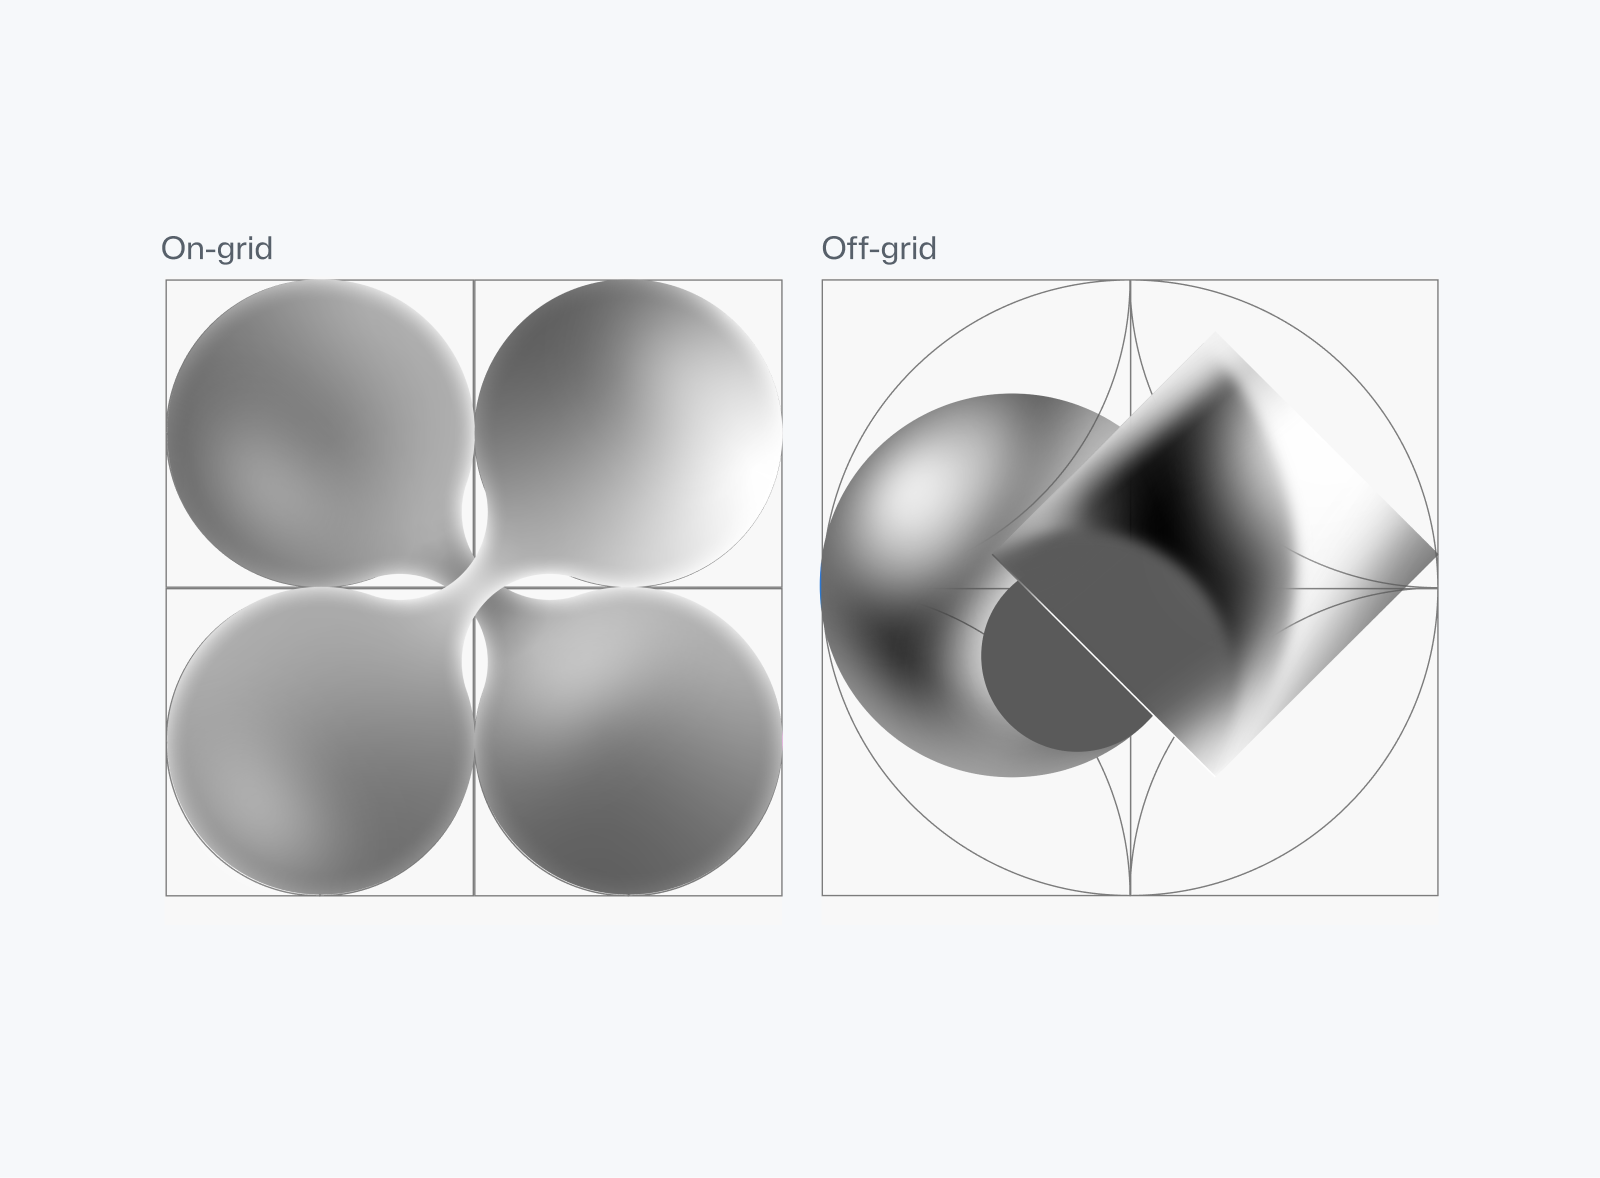 Two abstract grayscale illustrations, one of which adheres to a circular grid, the other of which deviates from it